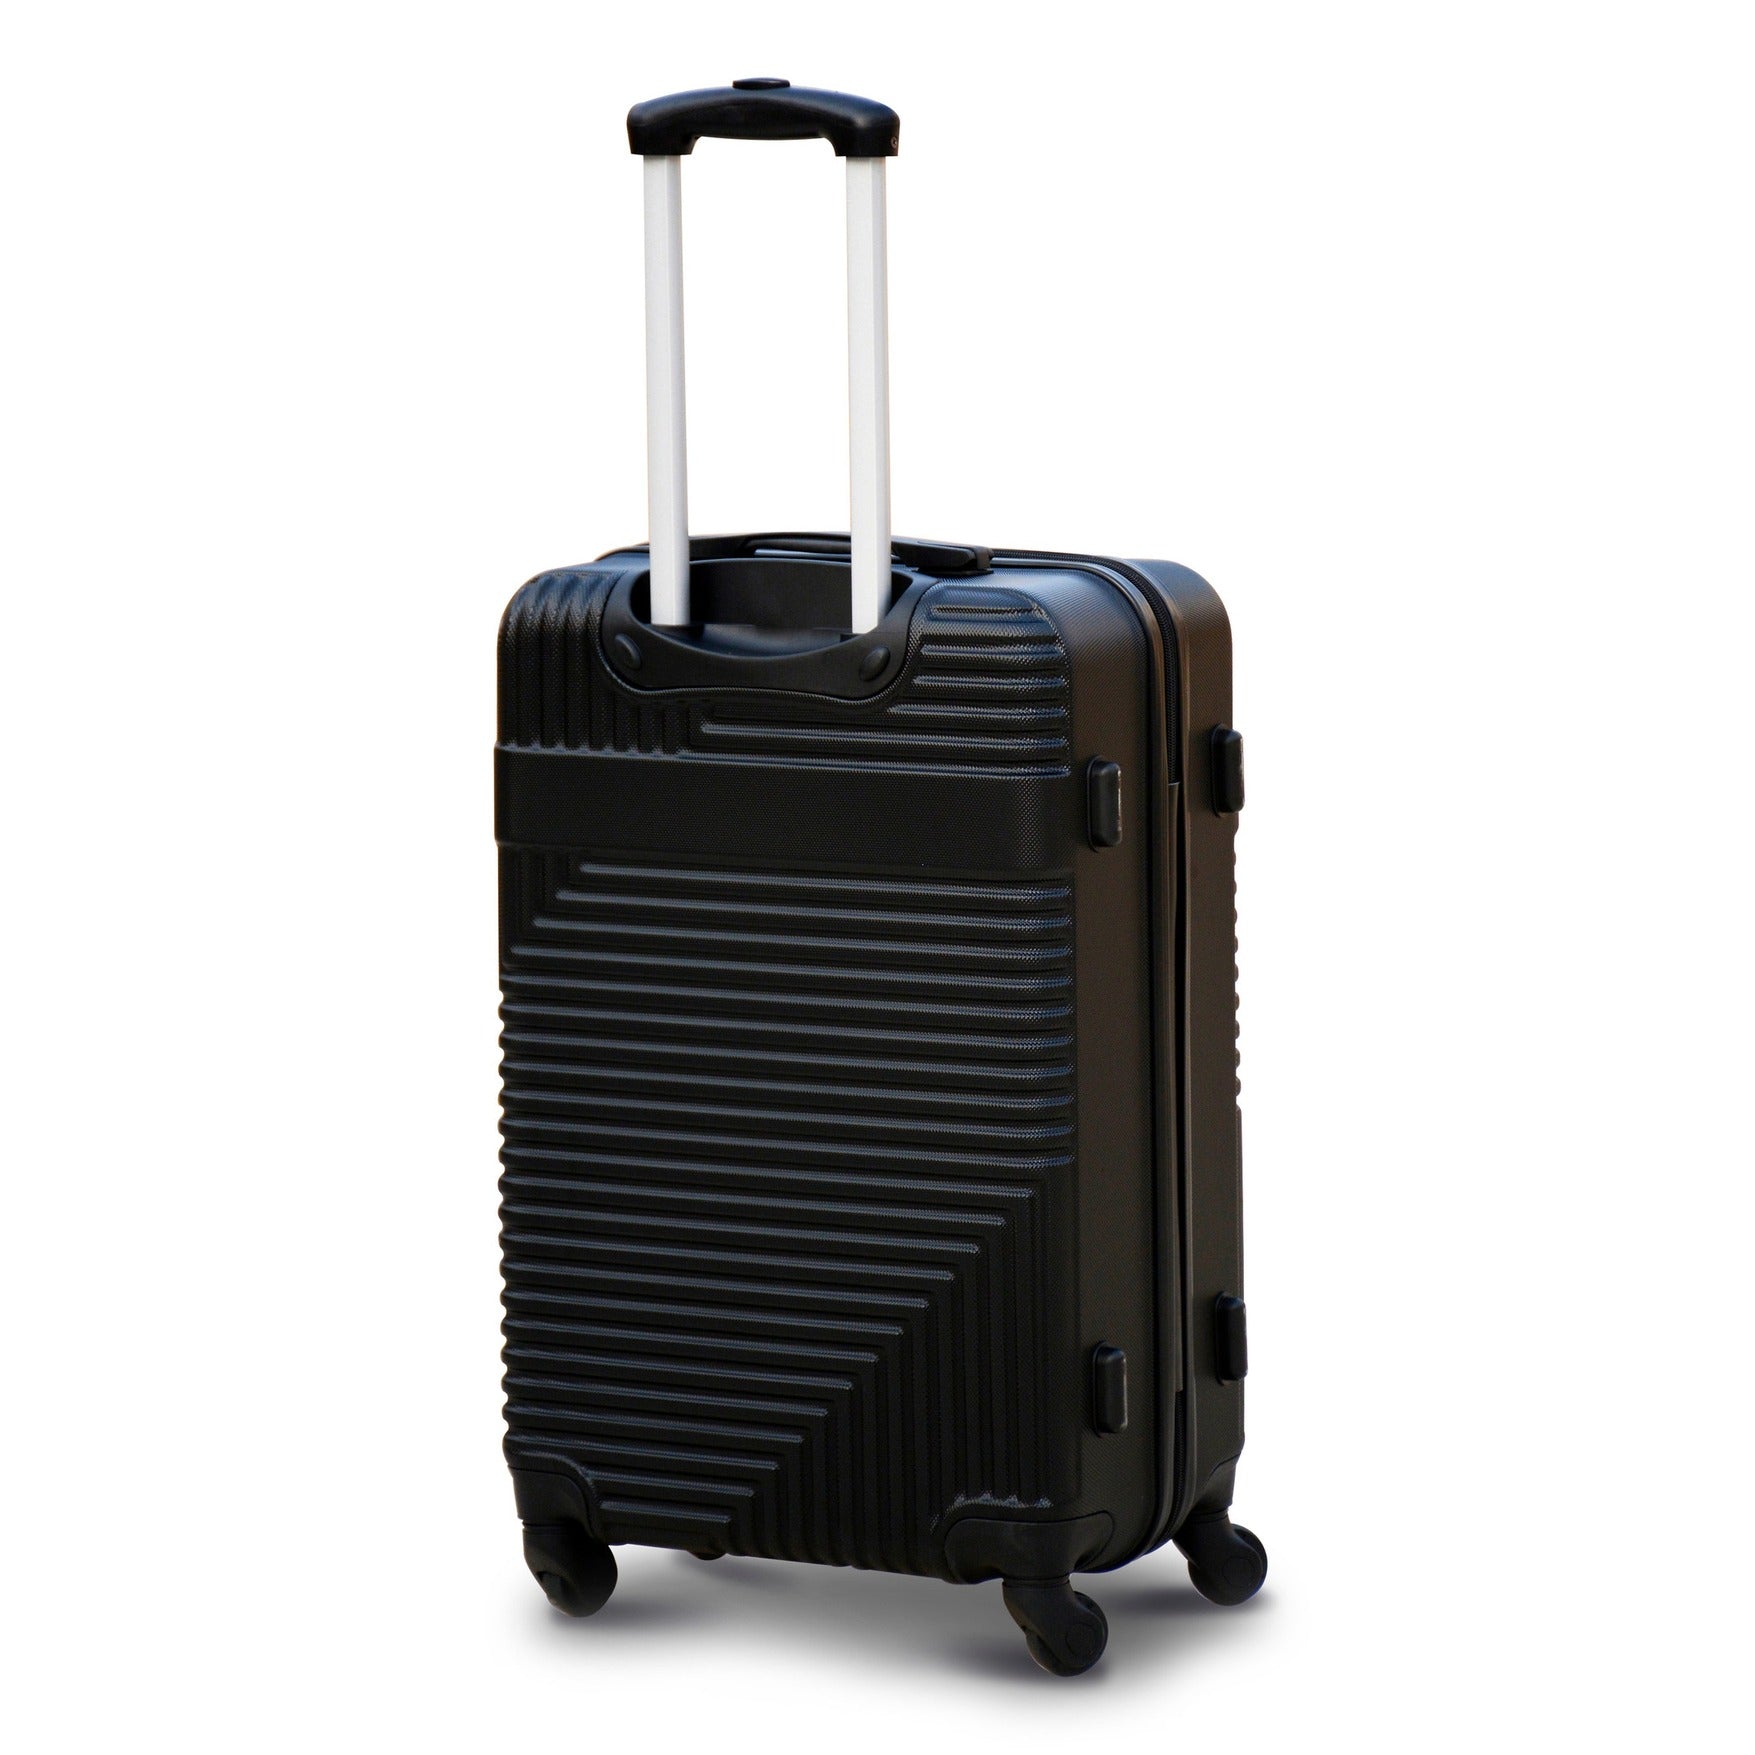 28" Black Travel Way ABS Lightweight Luggage Bag With Spinner Wheel